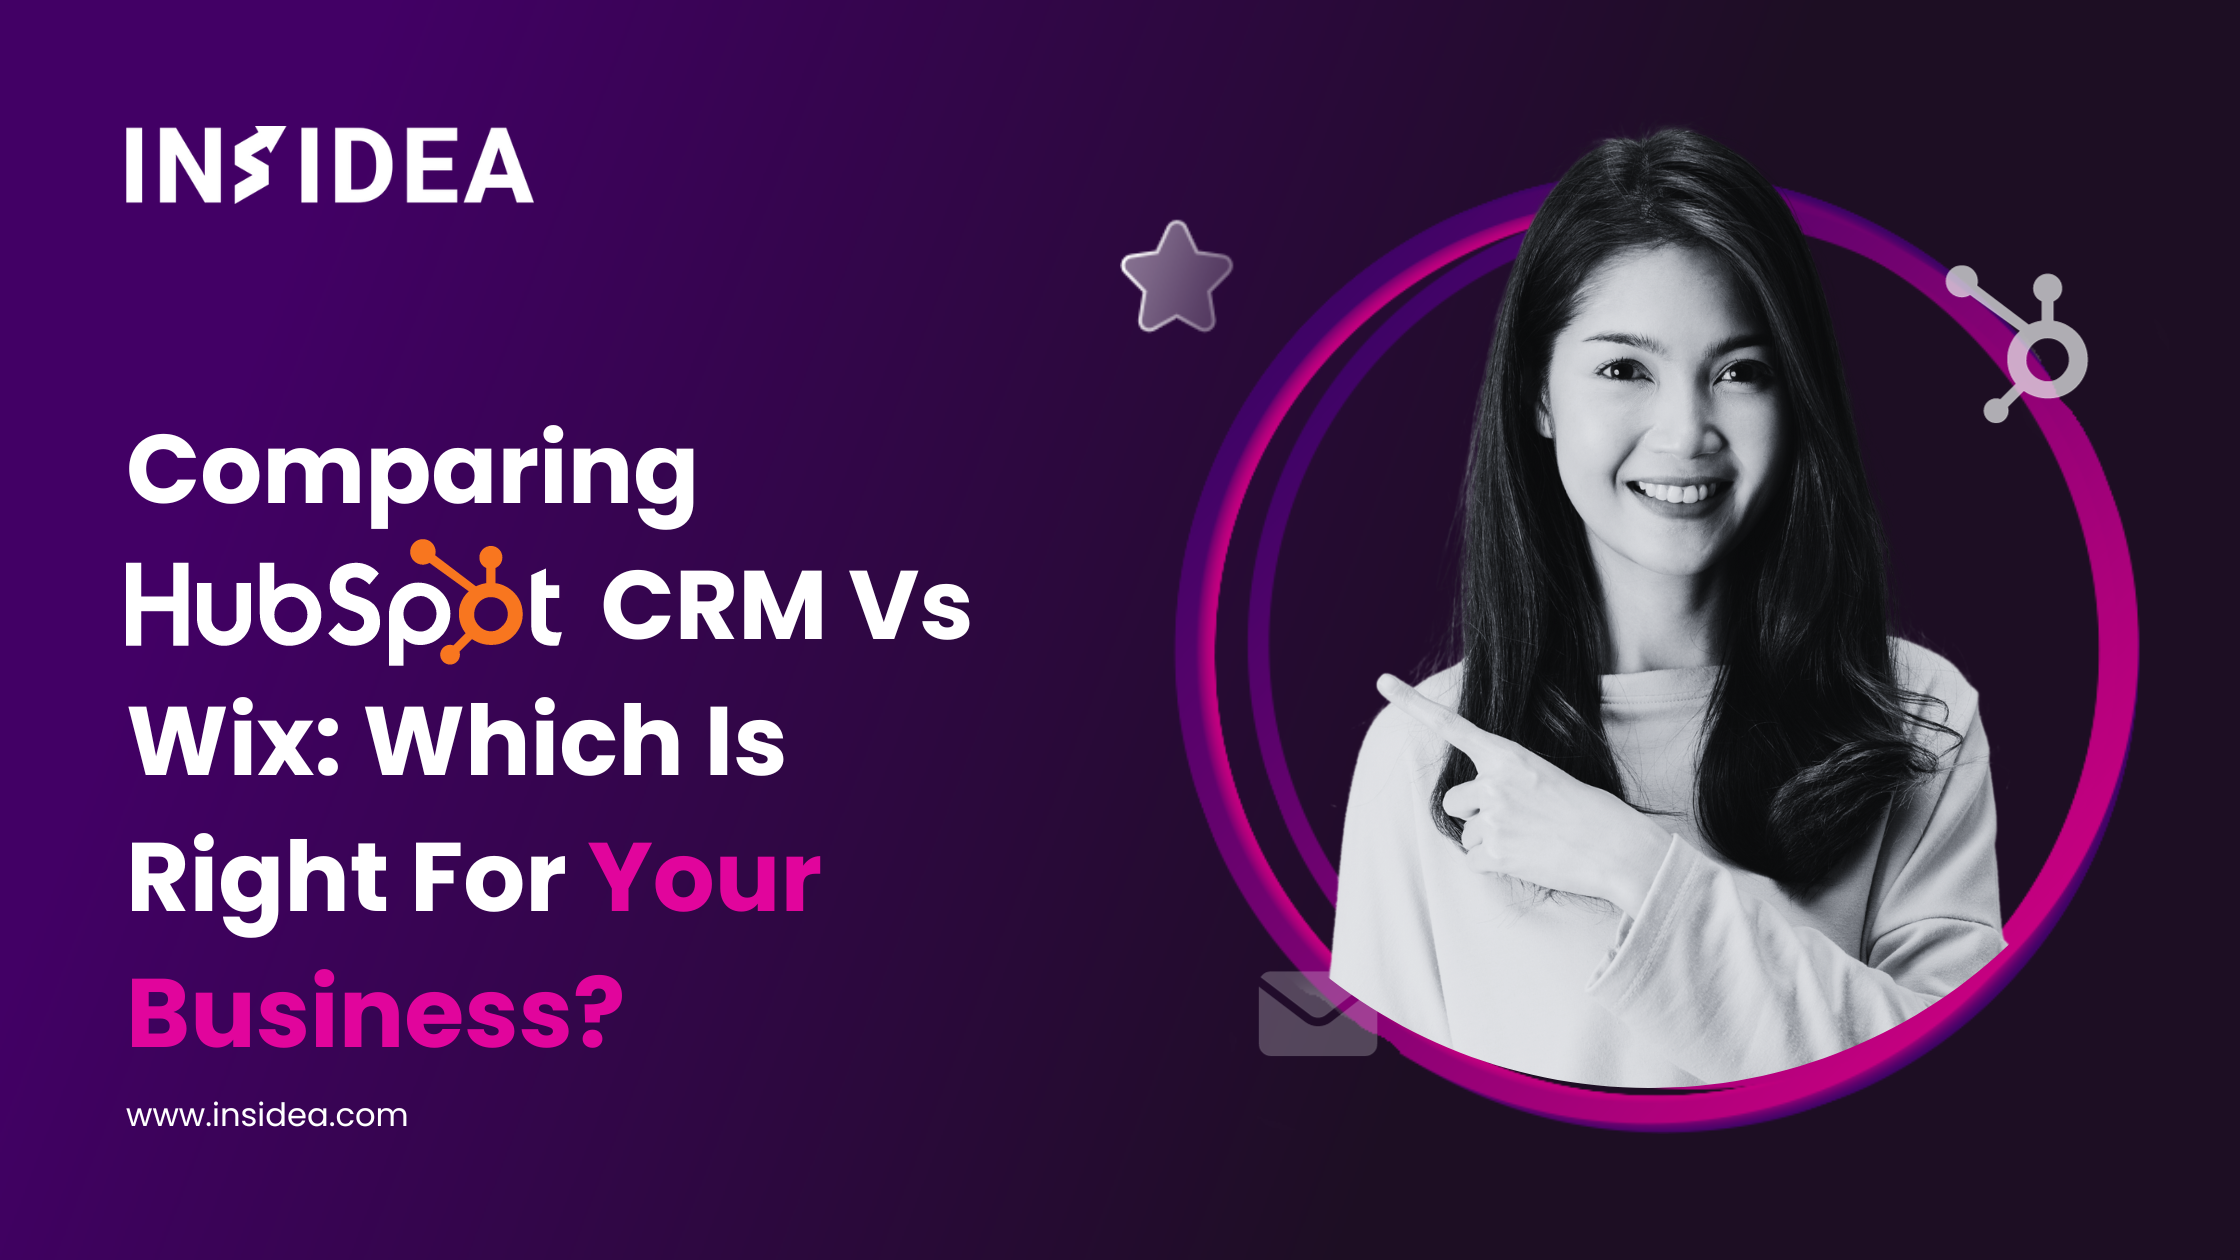 Comparing HubSpot CRM Vs Wix Which Is Right For Your Business